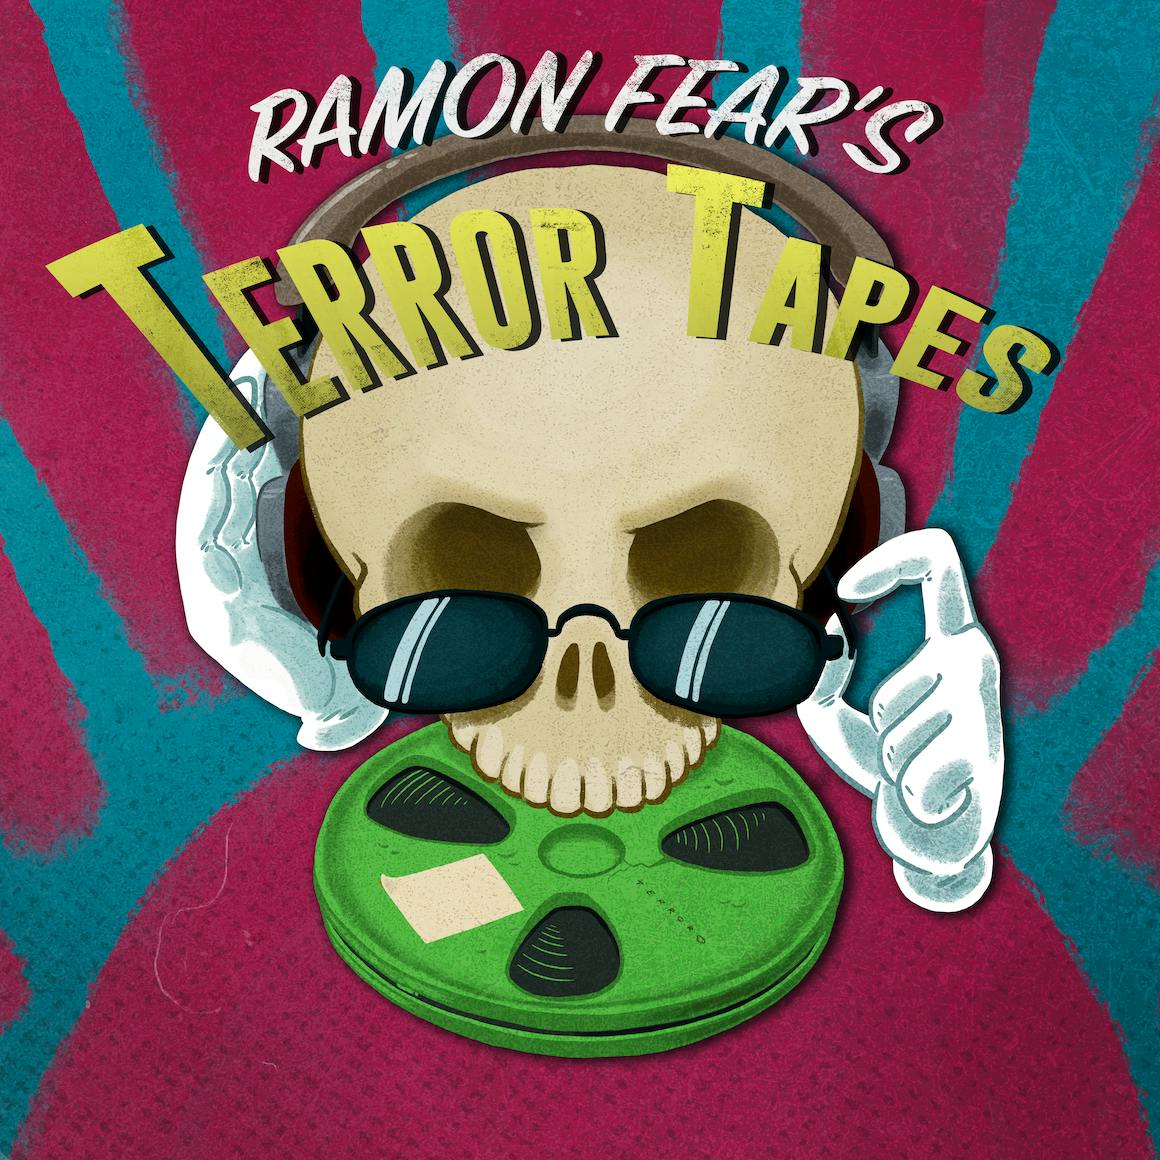 Introducing: Ramon Fear's Terror Tapes